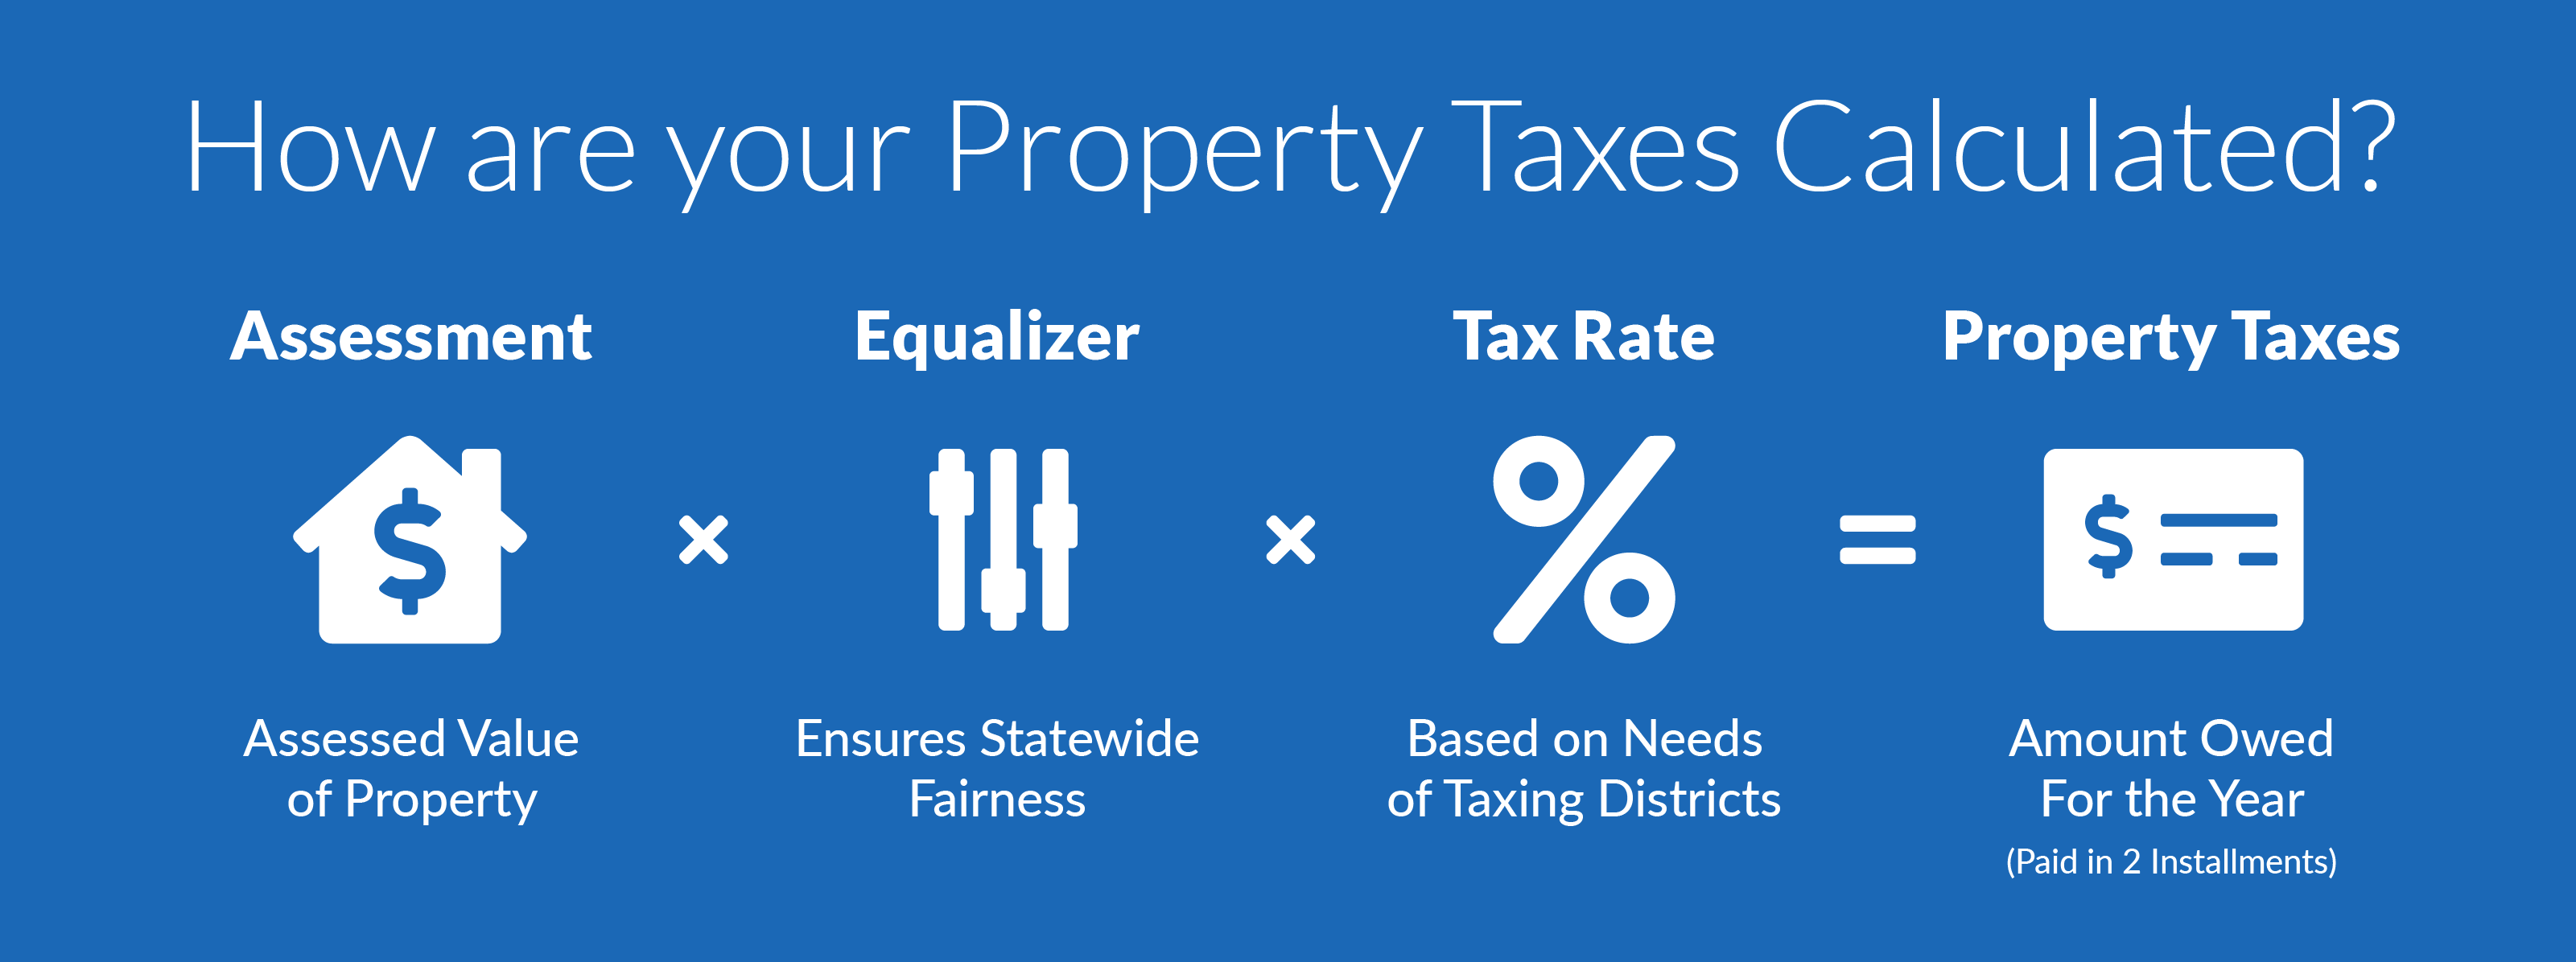 How are your Property Taxes Calculated?